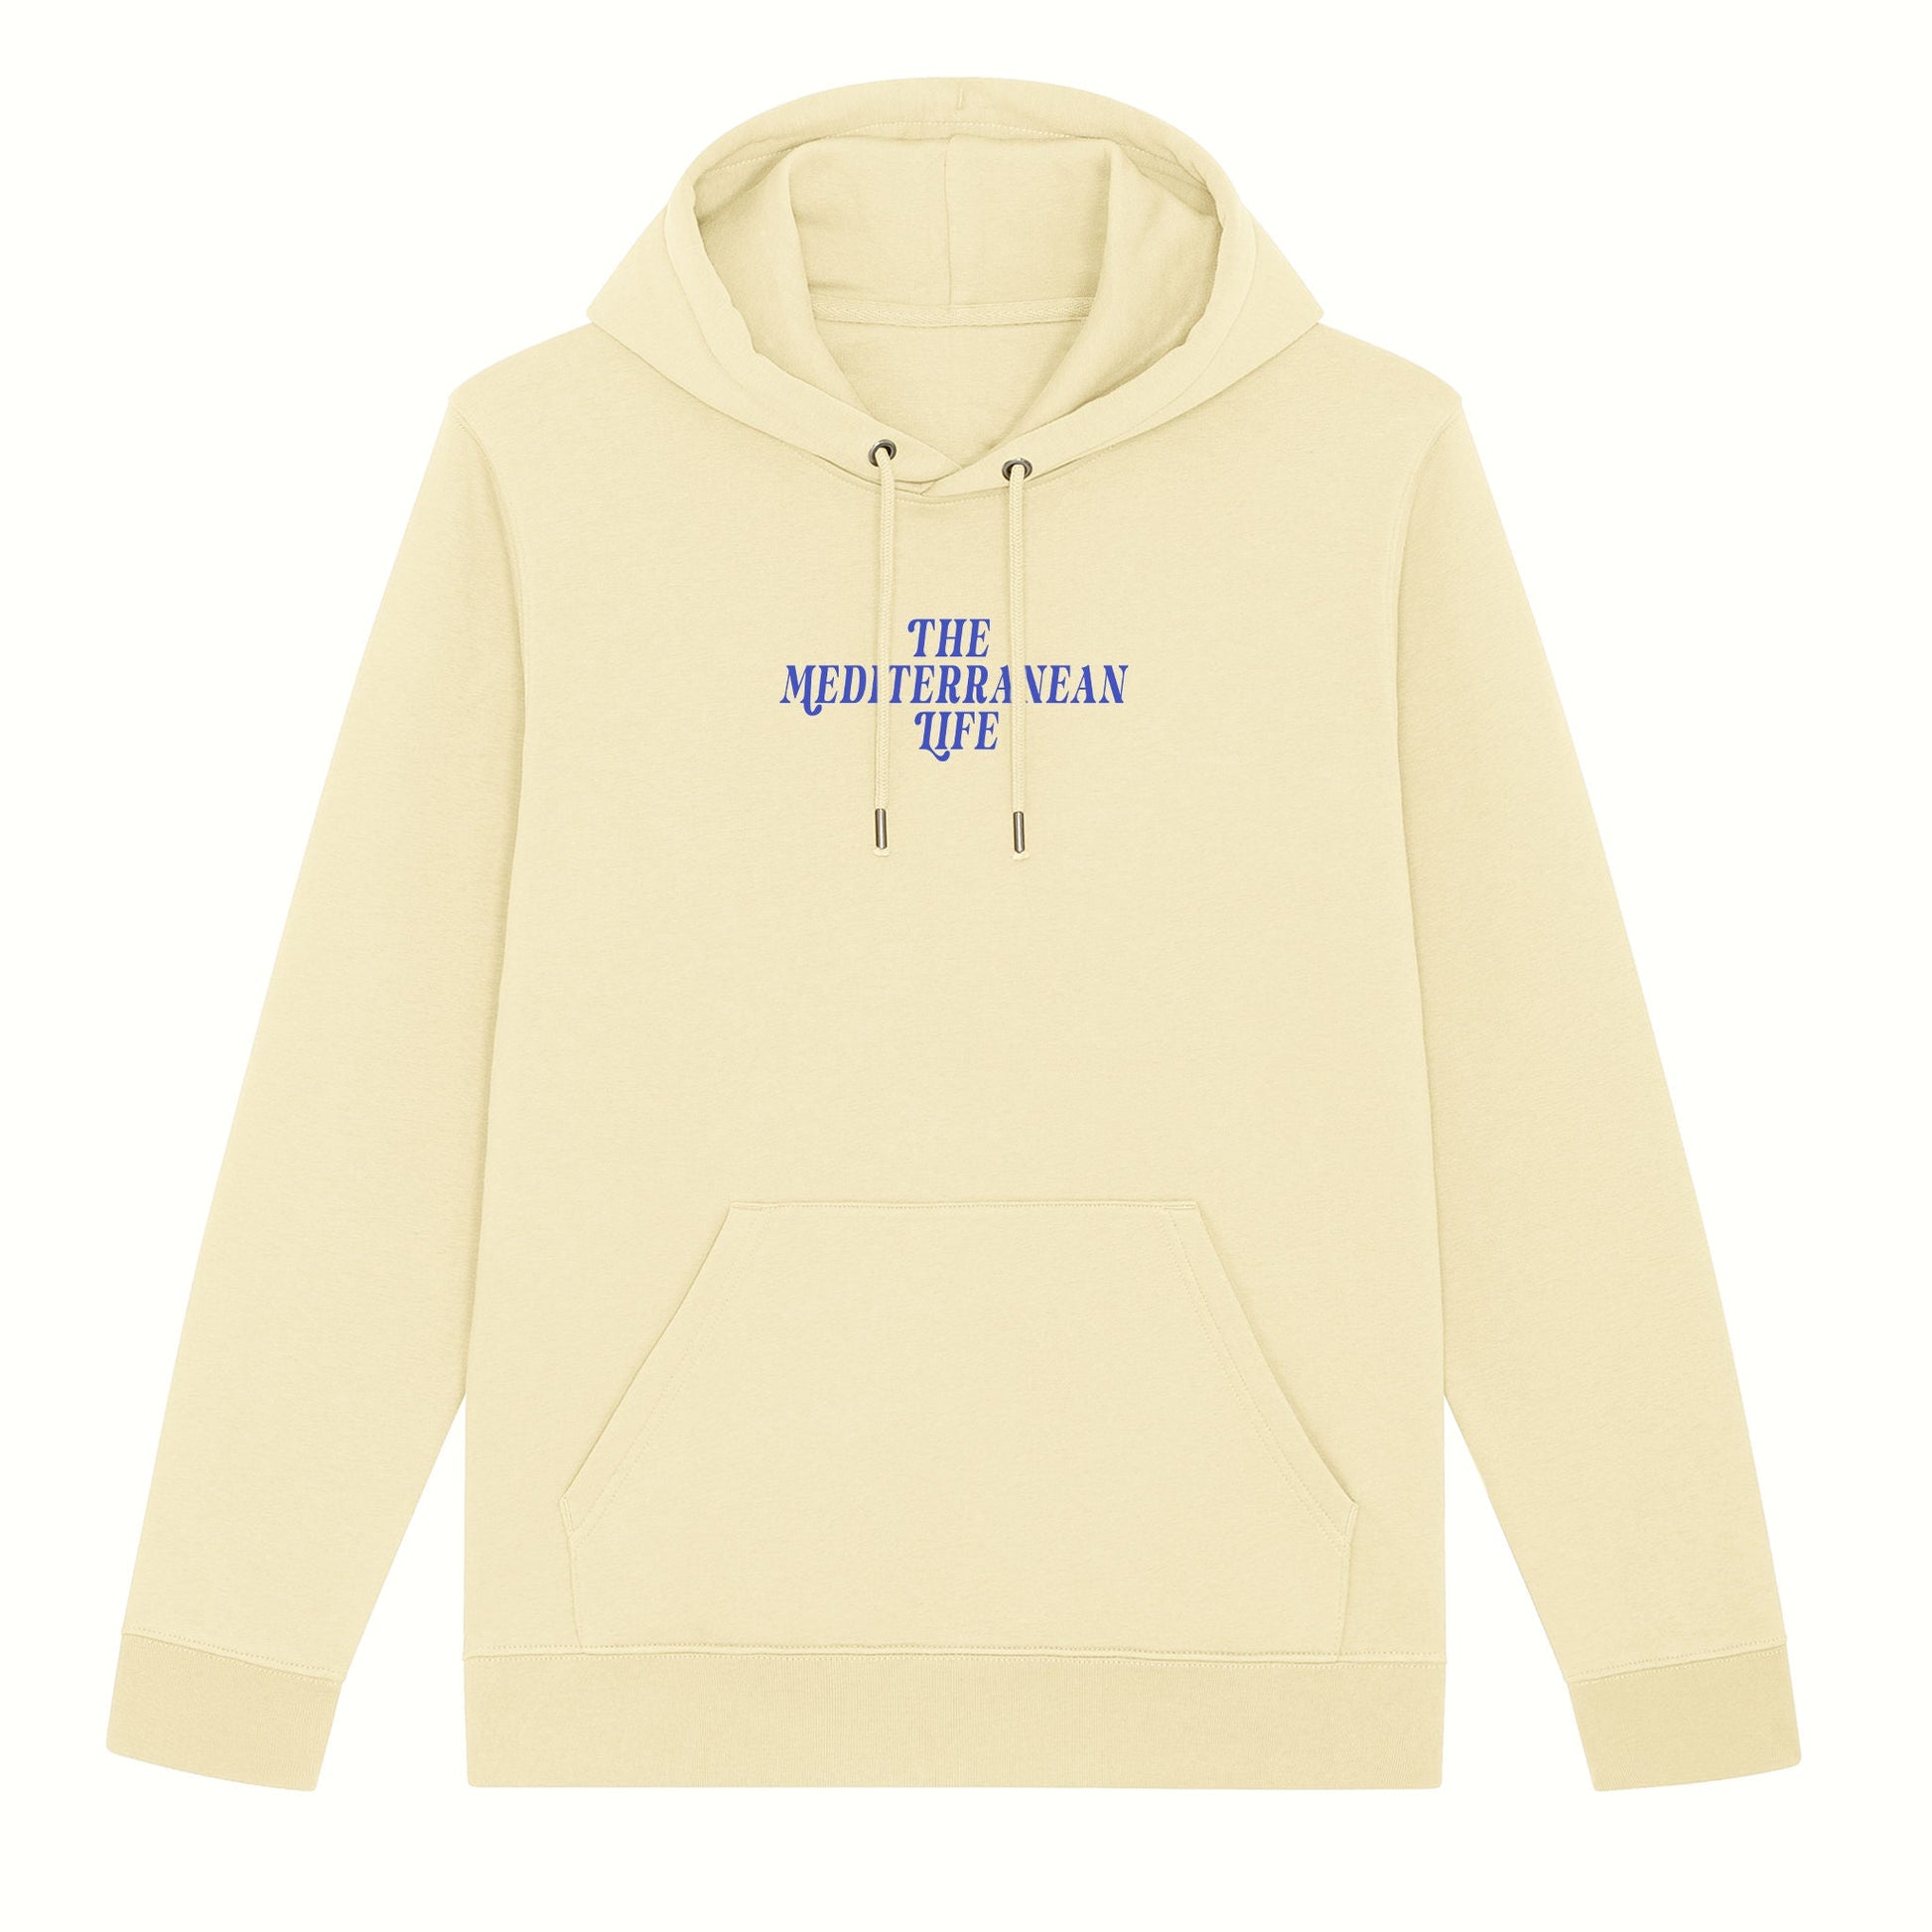 Fear the ordinary cream premium organic cotton hoodie with blue adventure inspired front print.